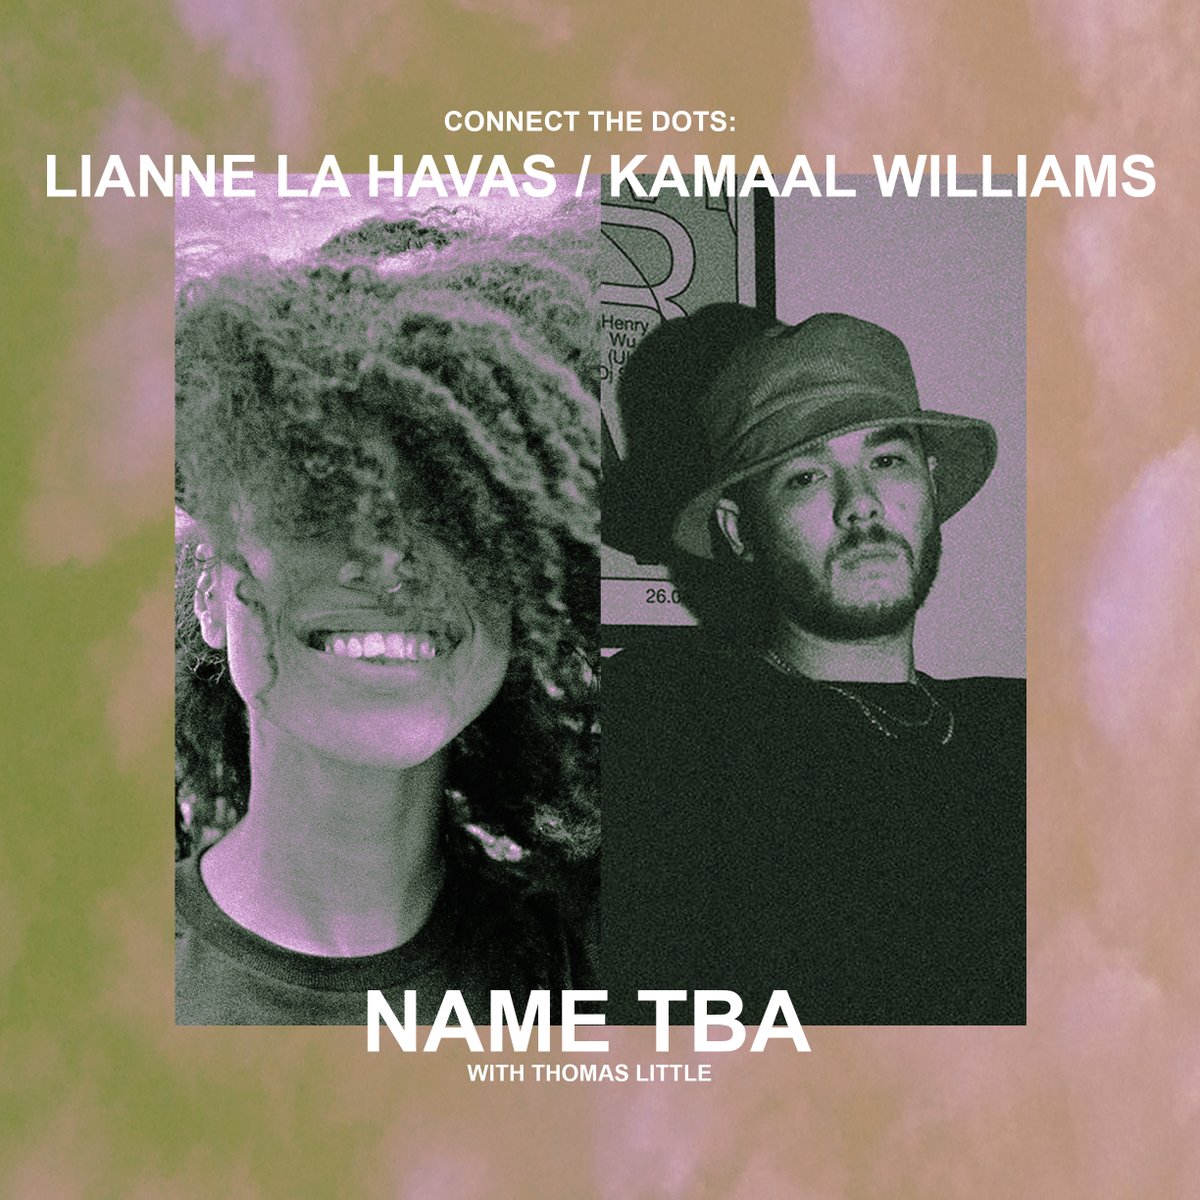 two great new albums from @liannelahavas and @kamaalwilliams. let's see how they're musically connected... tune in now for connect the dots amazingradio.com